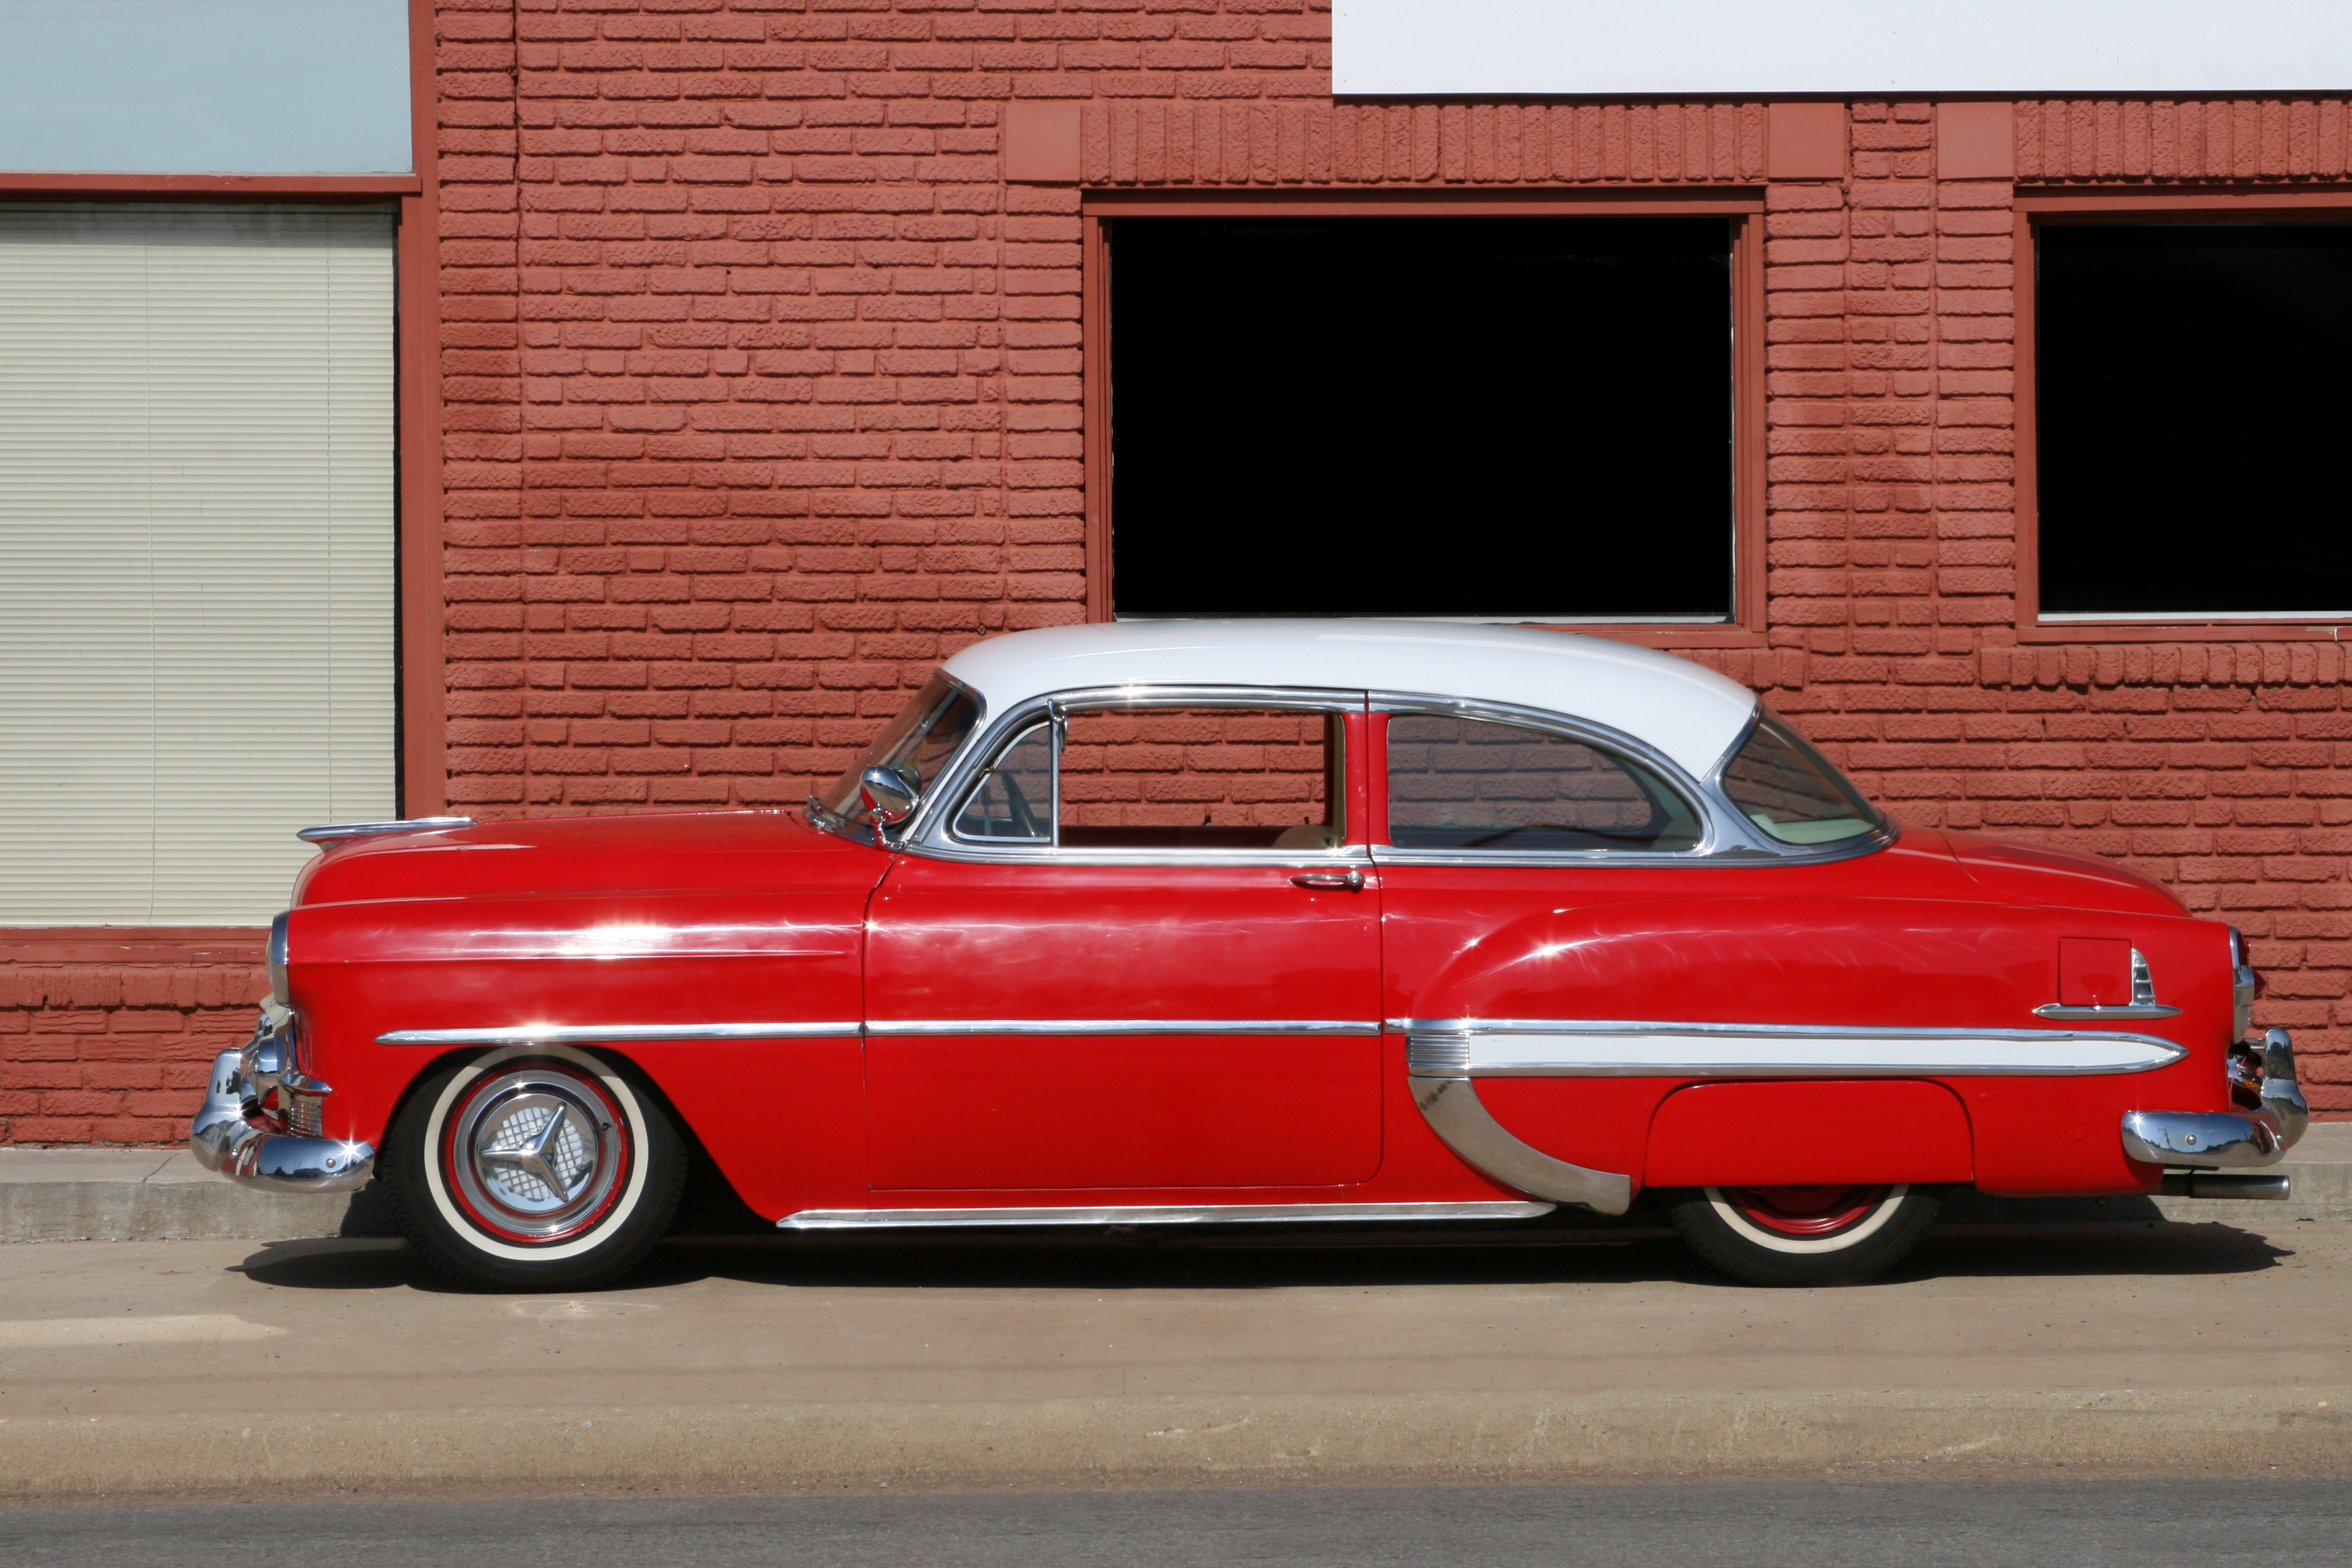 Une Chevy Bel Air rouge | Source : Getty Images